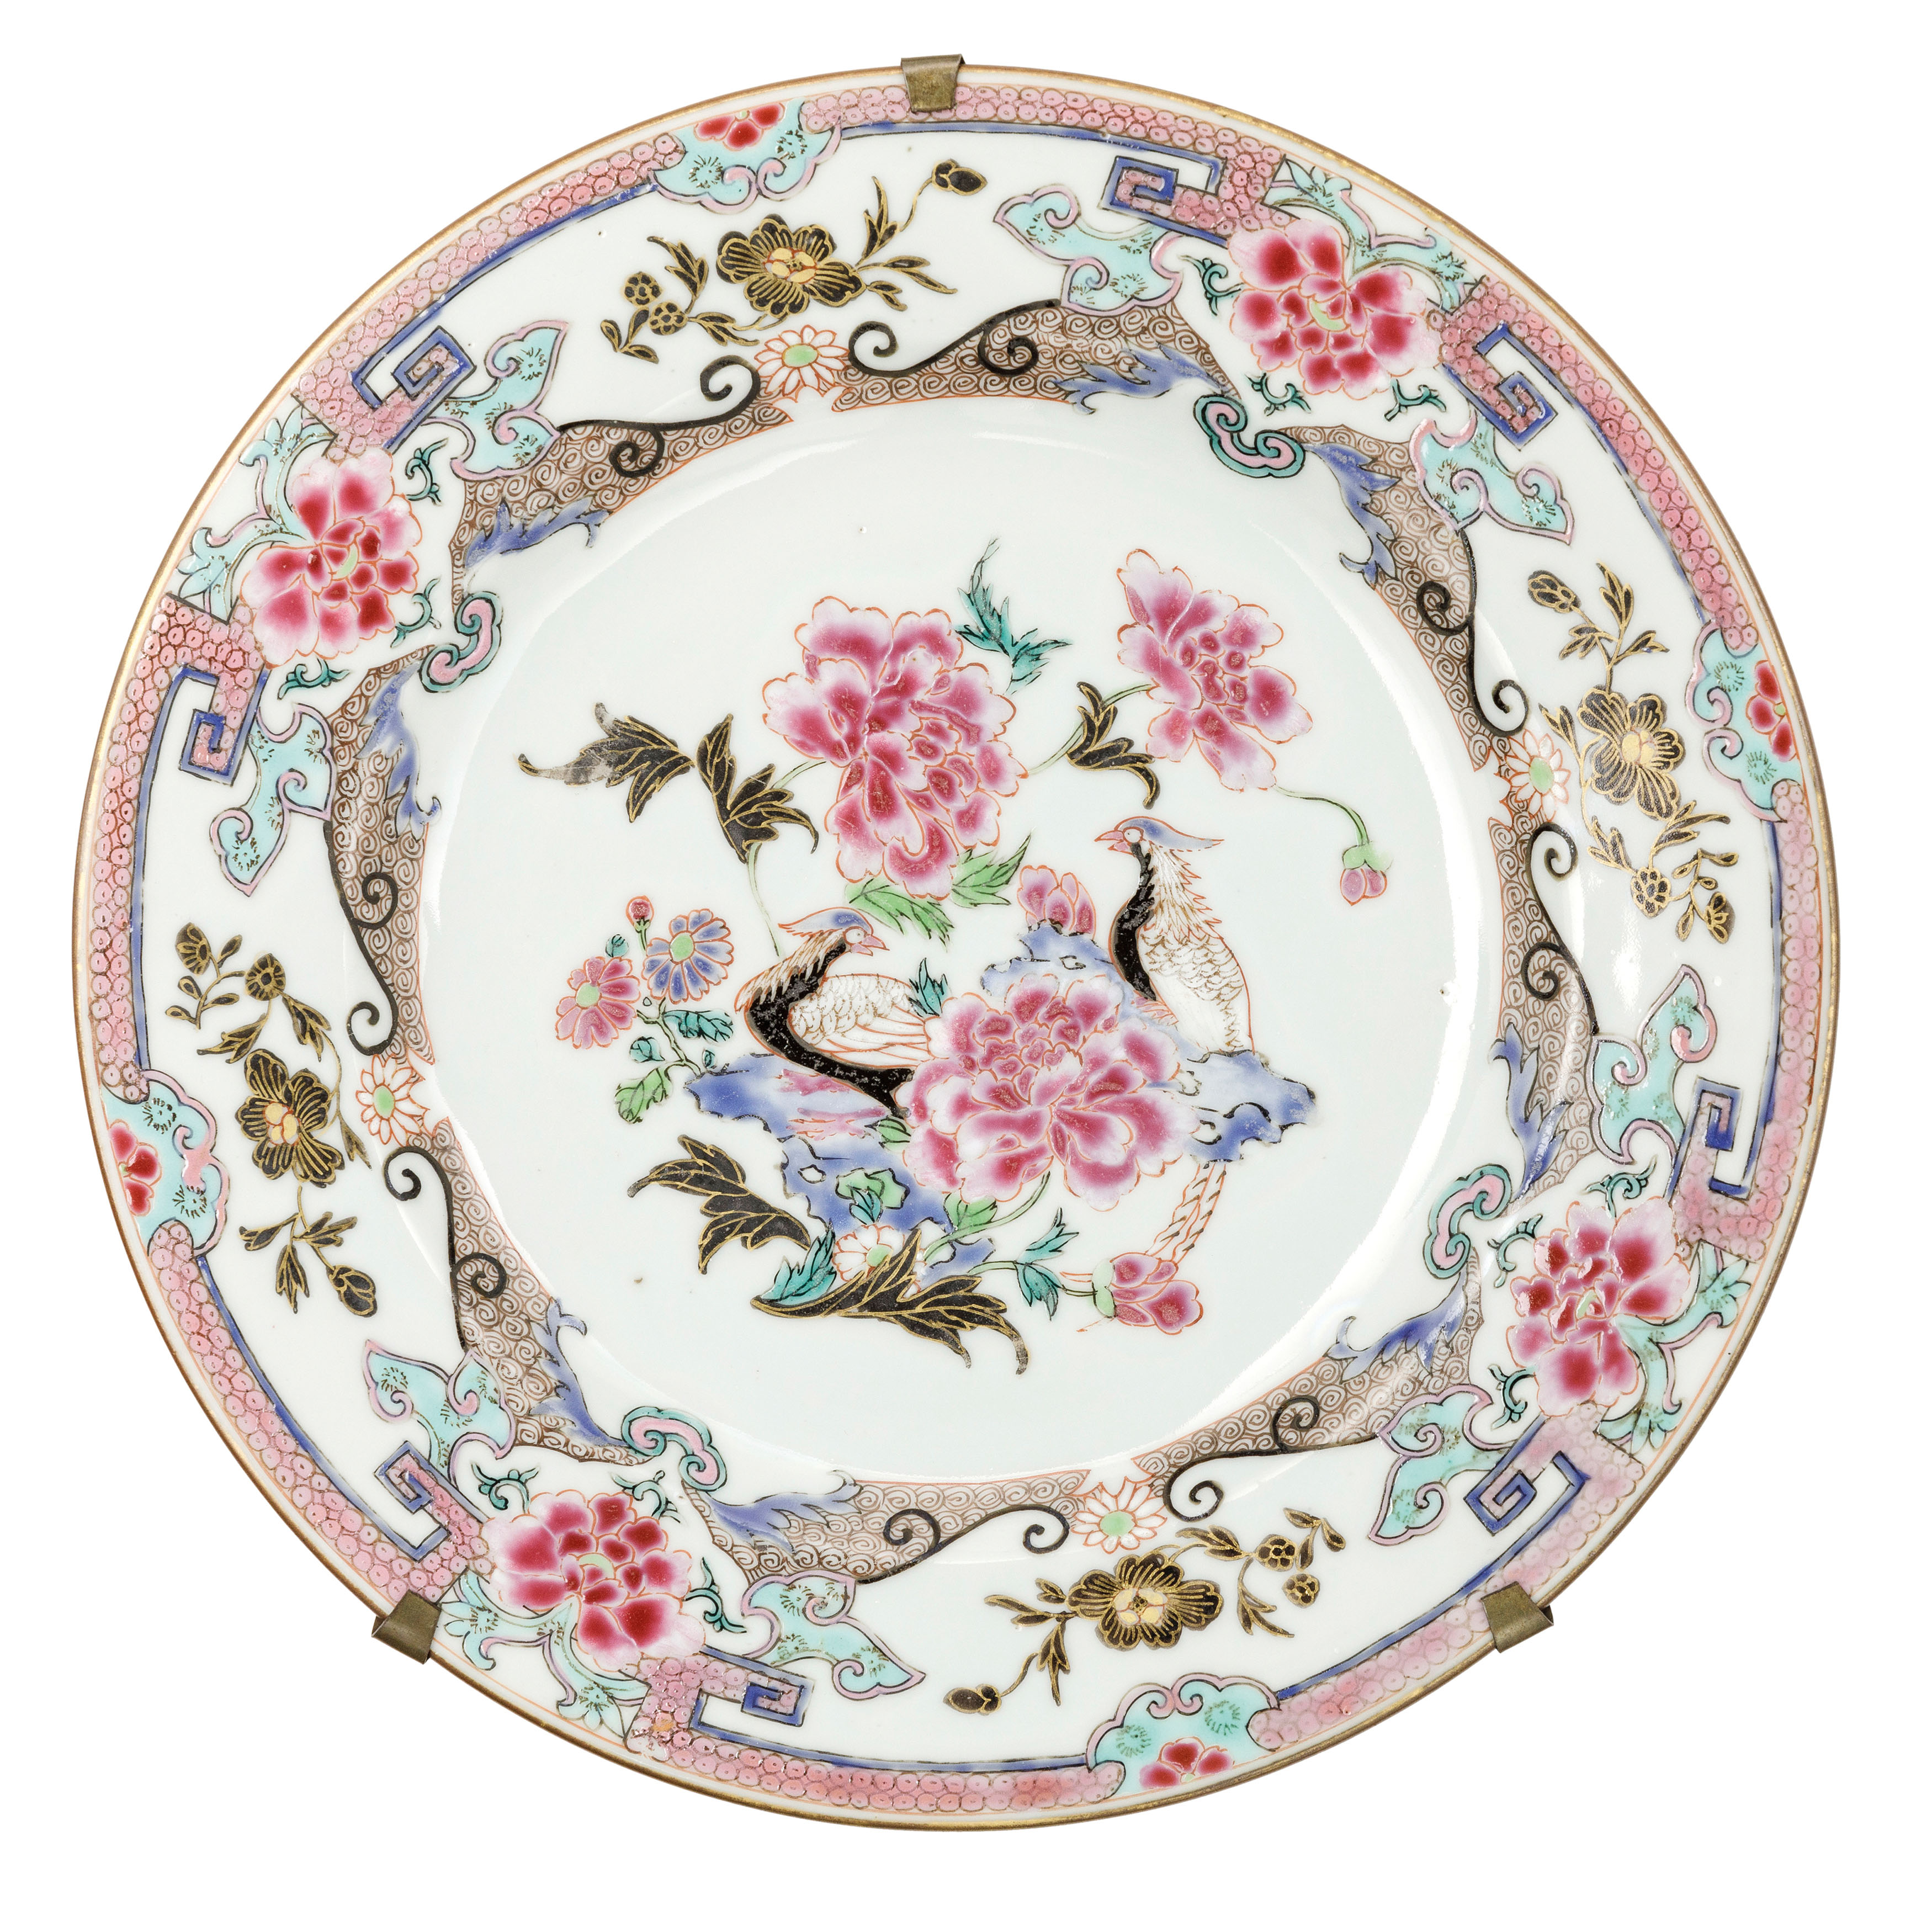 SIX DIFFERENT FAMILLE ROSE PORCELAIN DISHES, CHINA, MIDDLE 18TH CENTURY (6) - Image 4 of 6